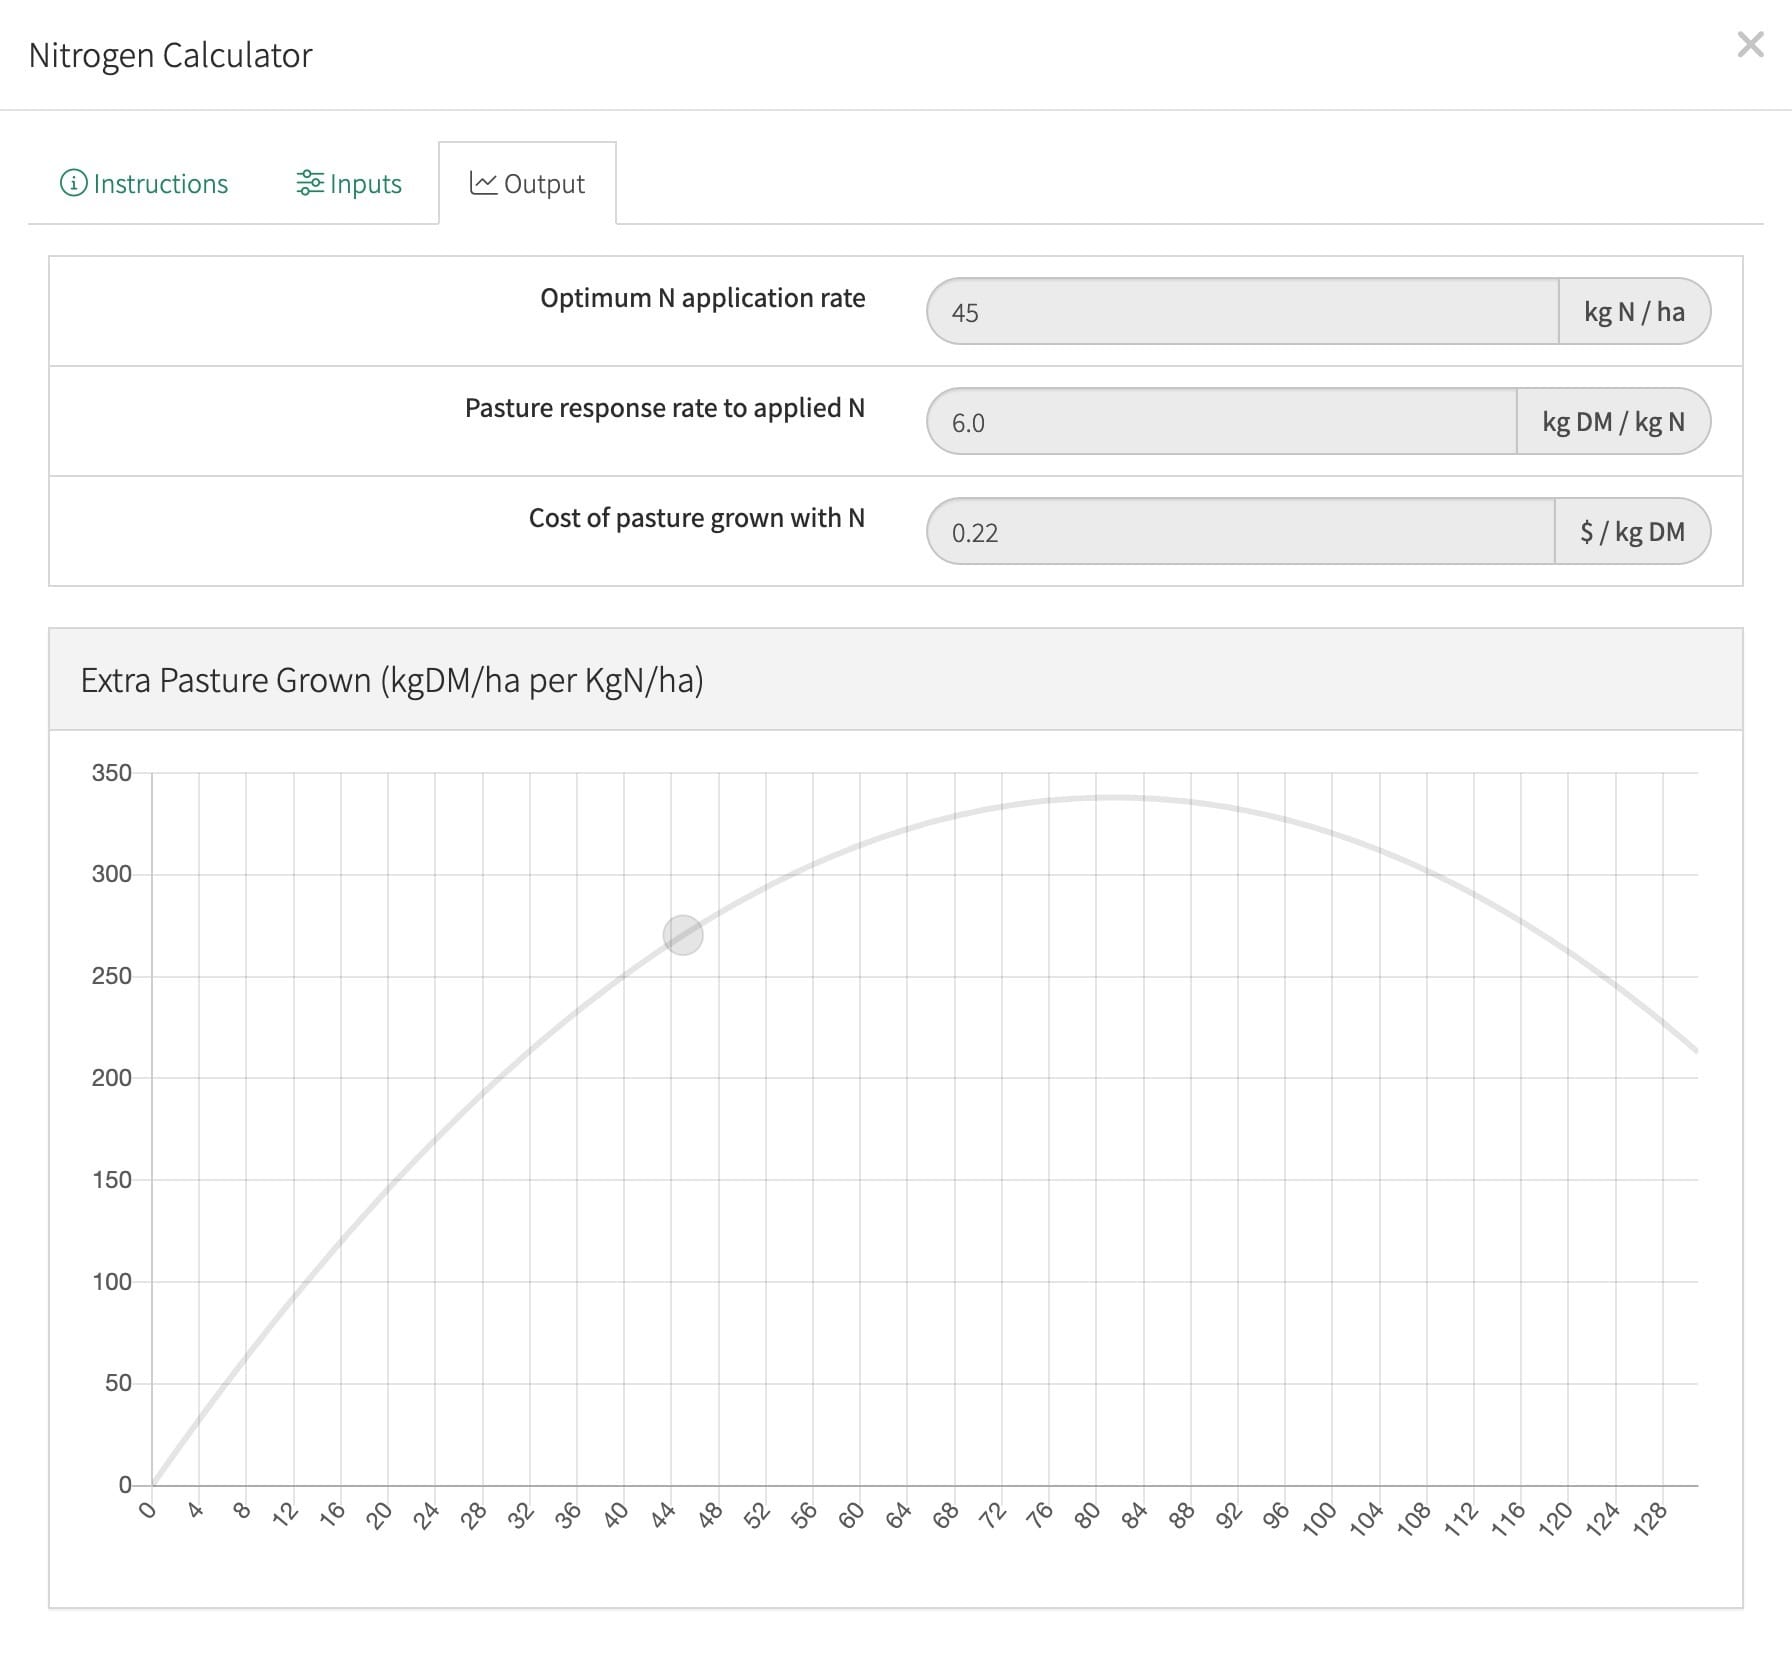 Pasture.io provides a nitrogen calculator so you can determine pasture growth response per kilogram of N applied.